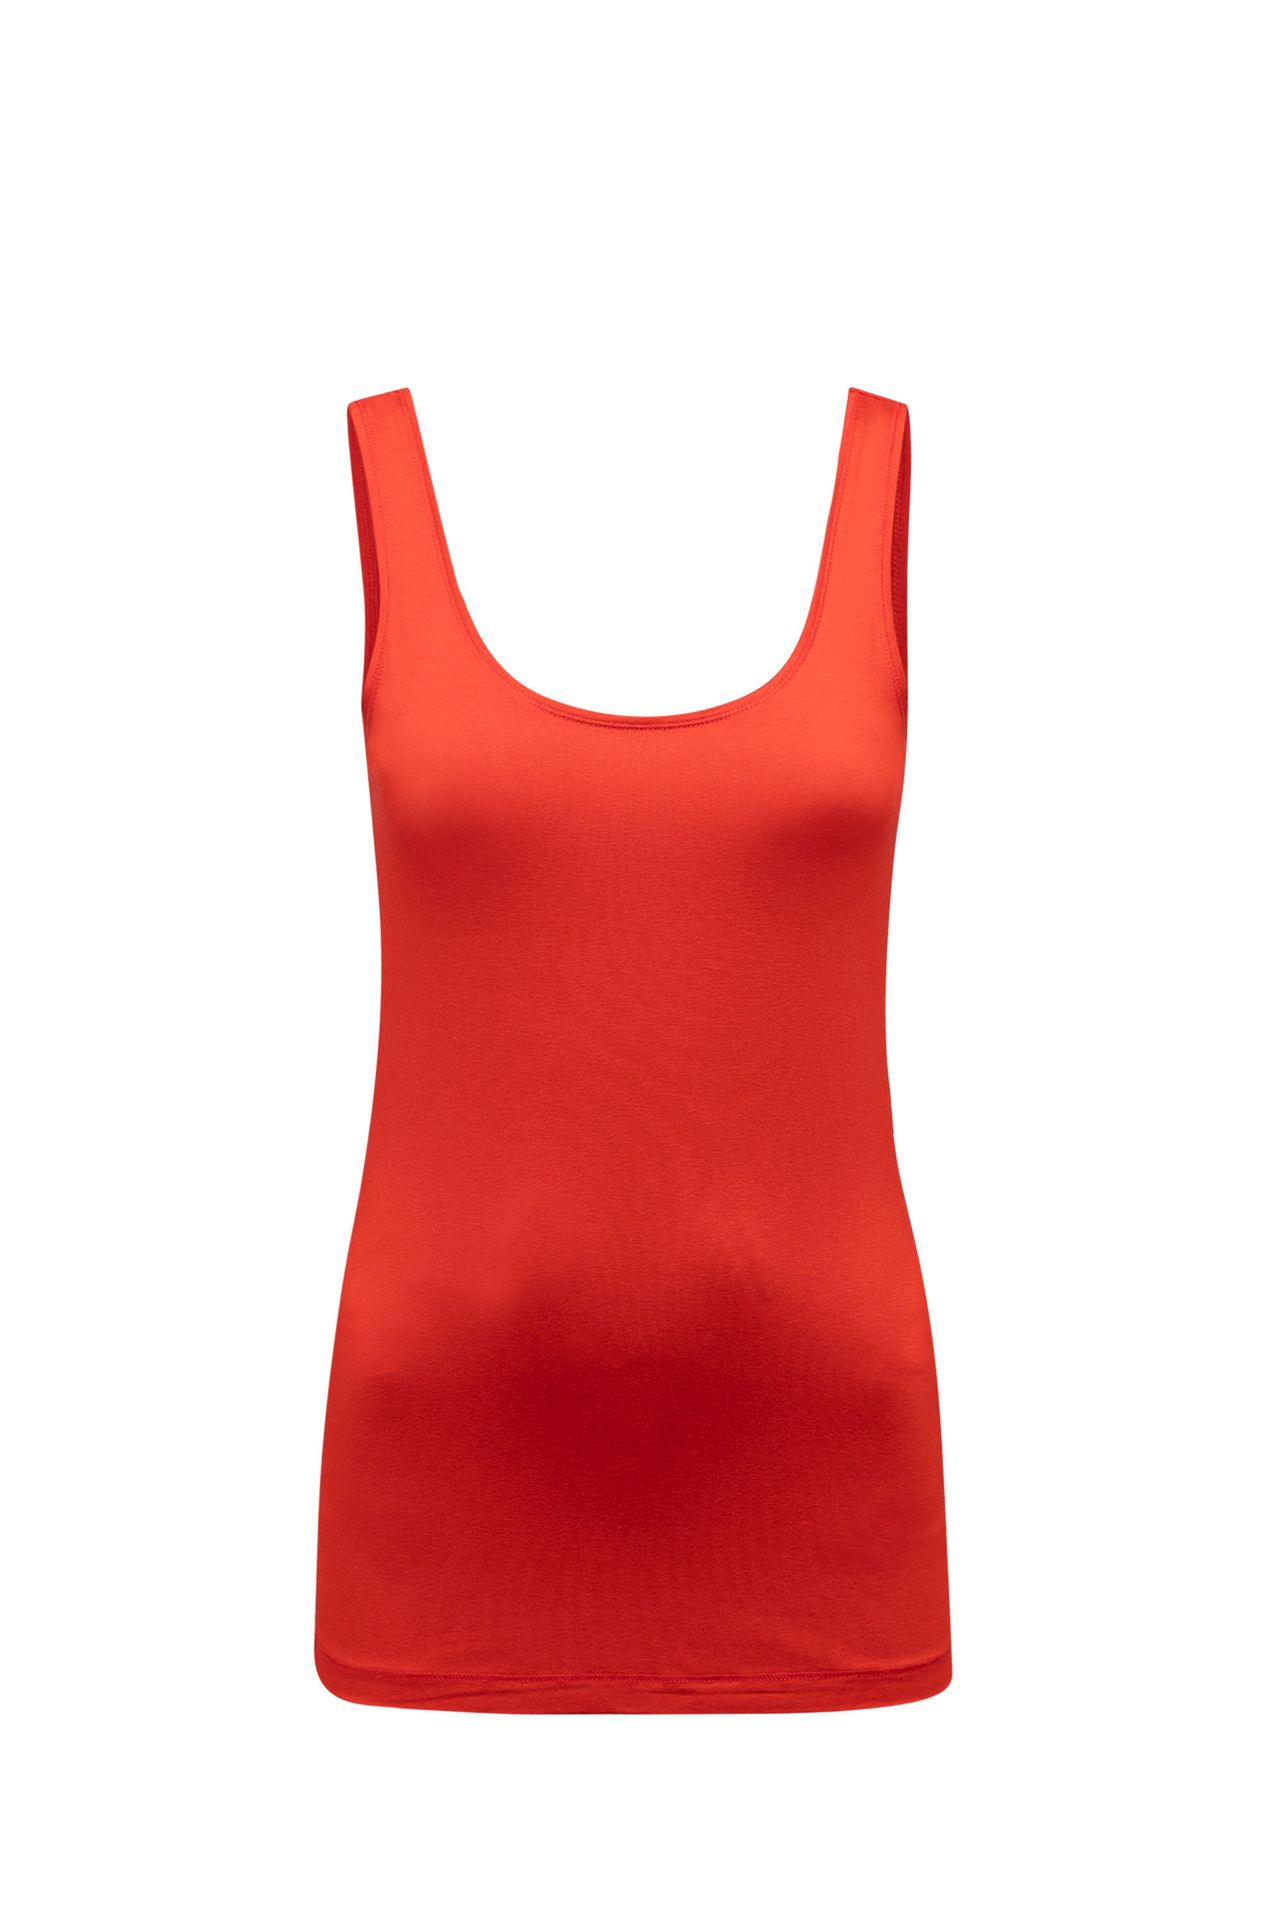 Norah Top Marianne rood tomato 212247-668